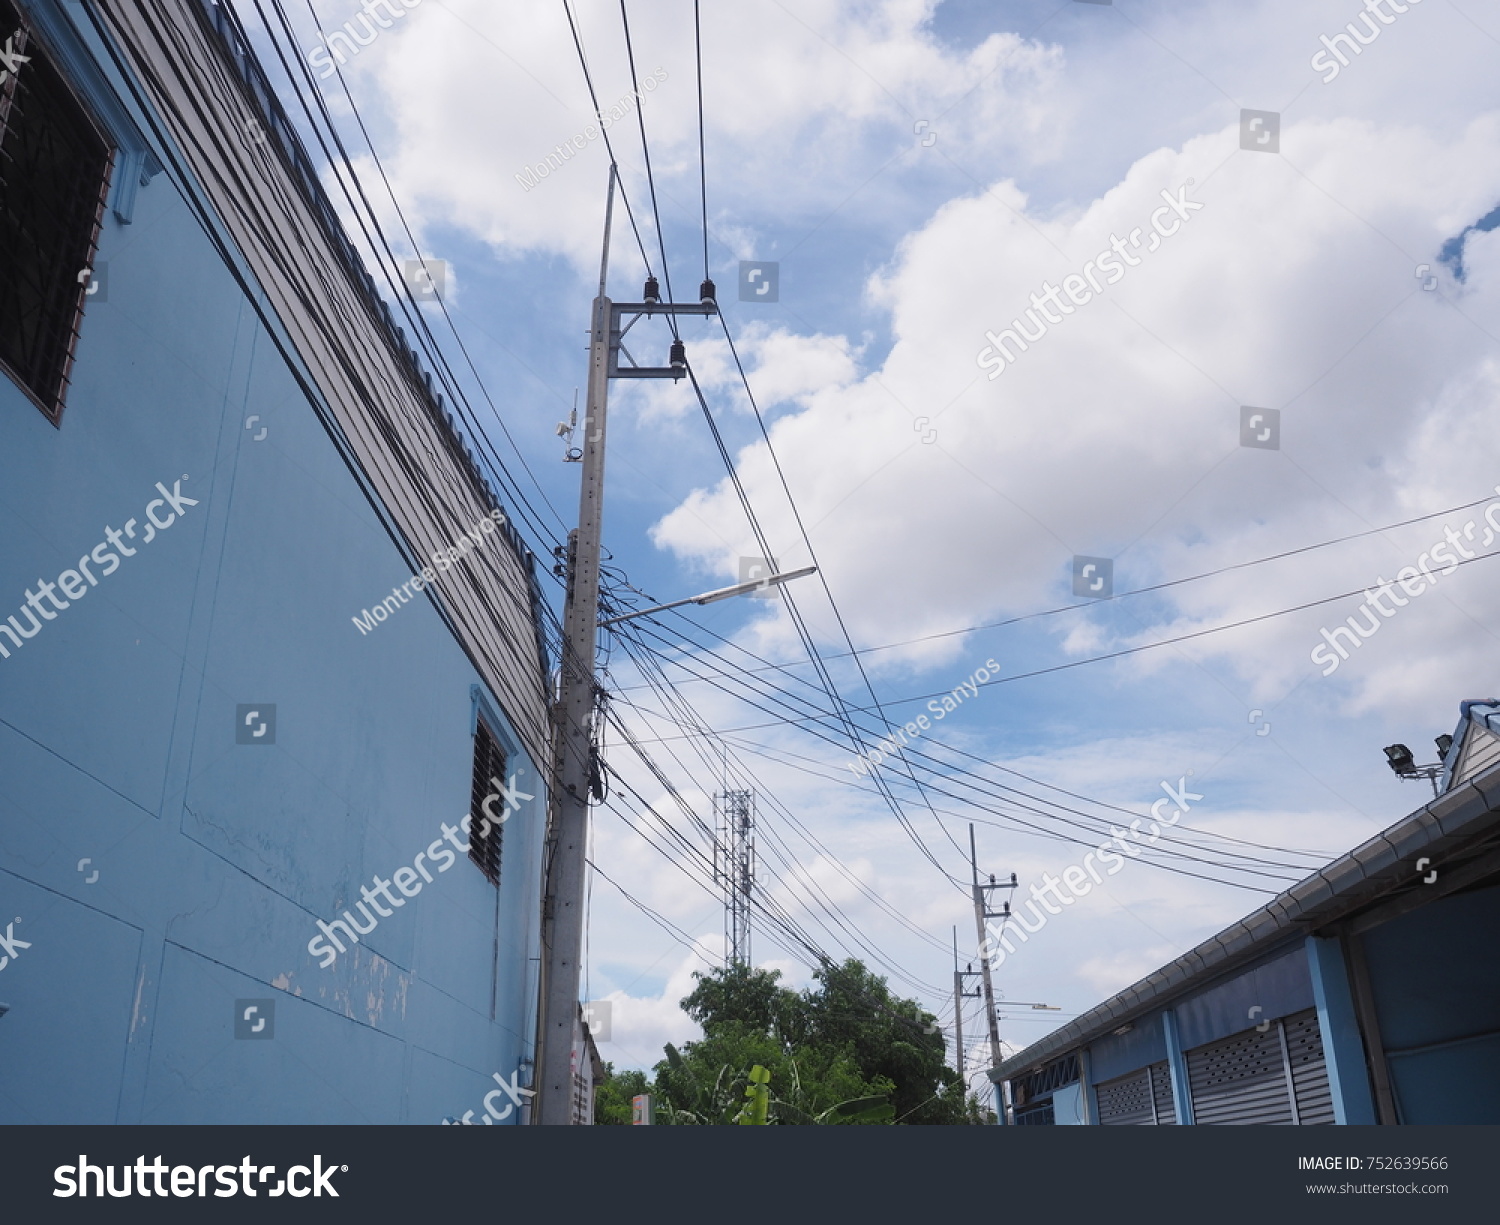 Electrical cable on sky in Thailand #752639566